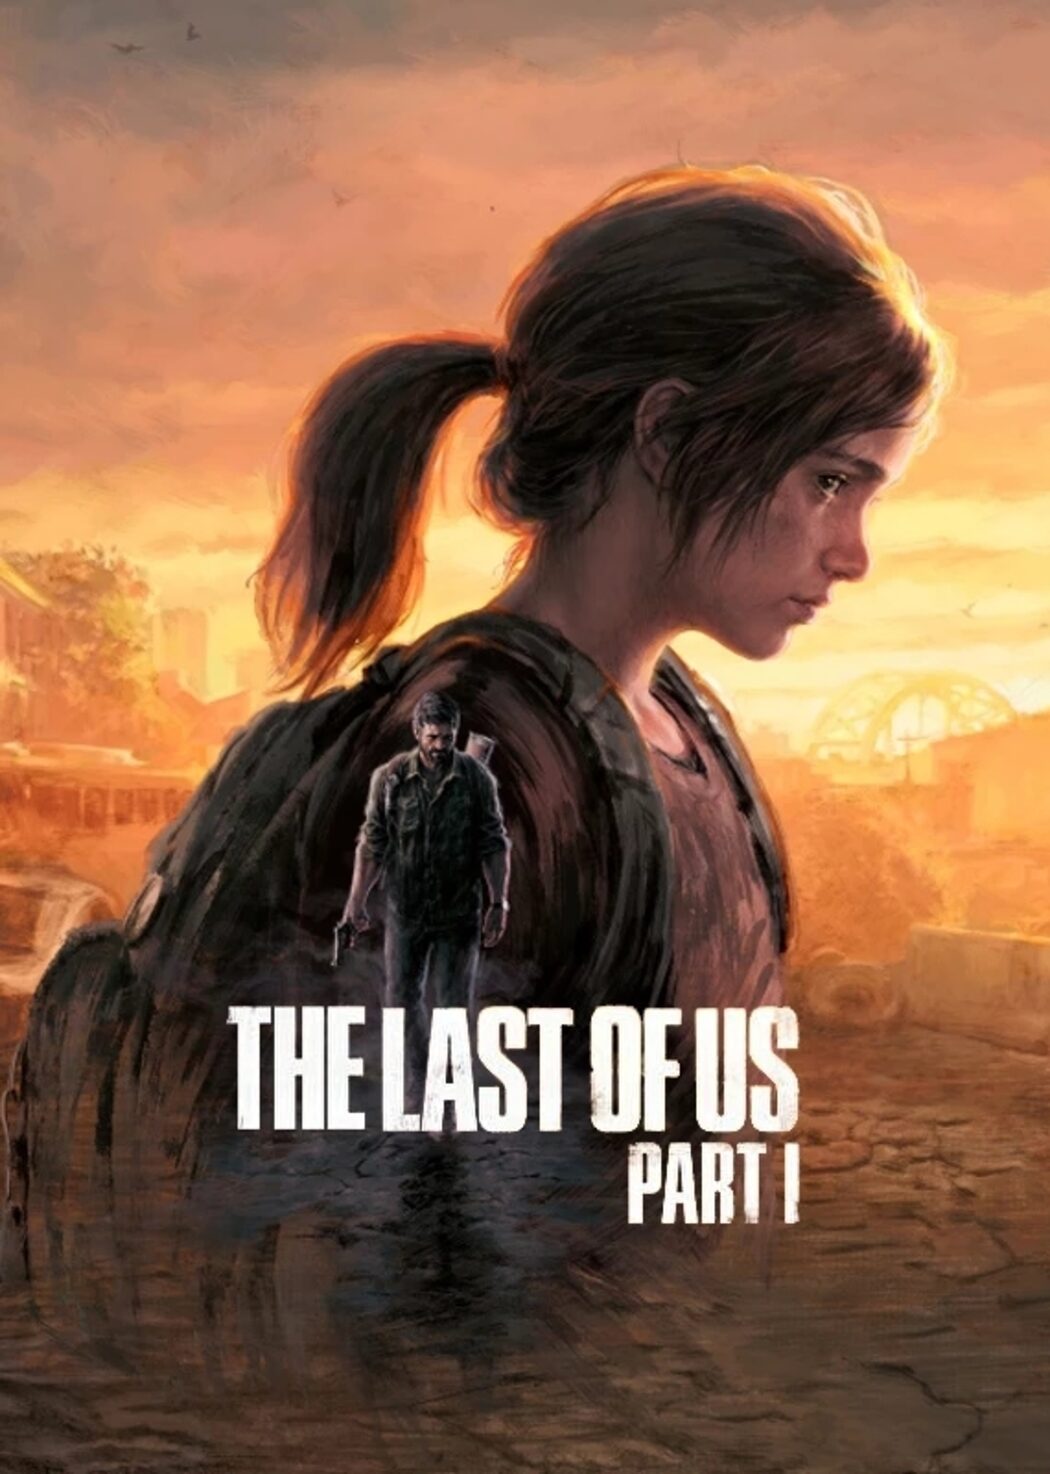 Is the last of us on steam фото 10